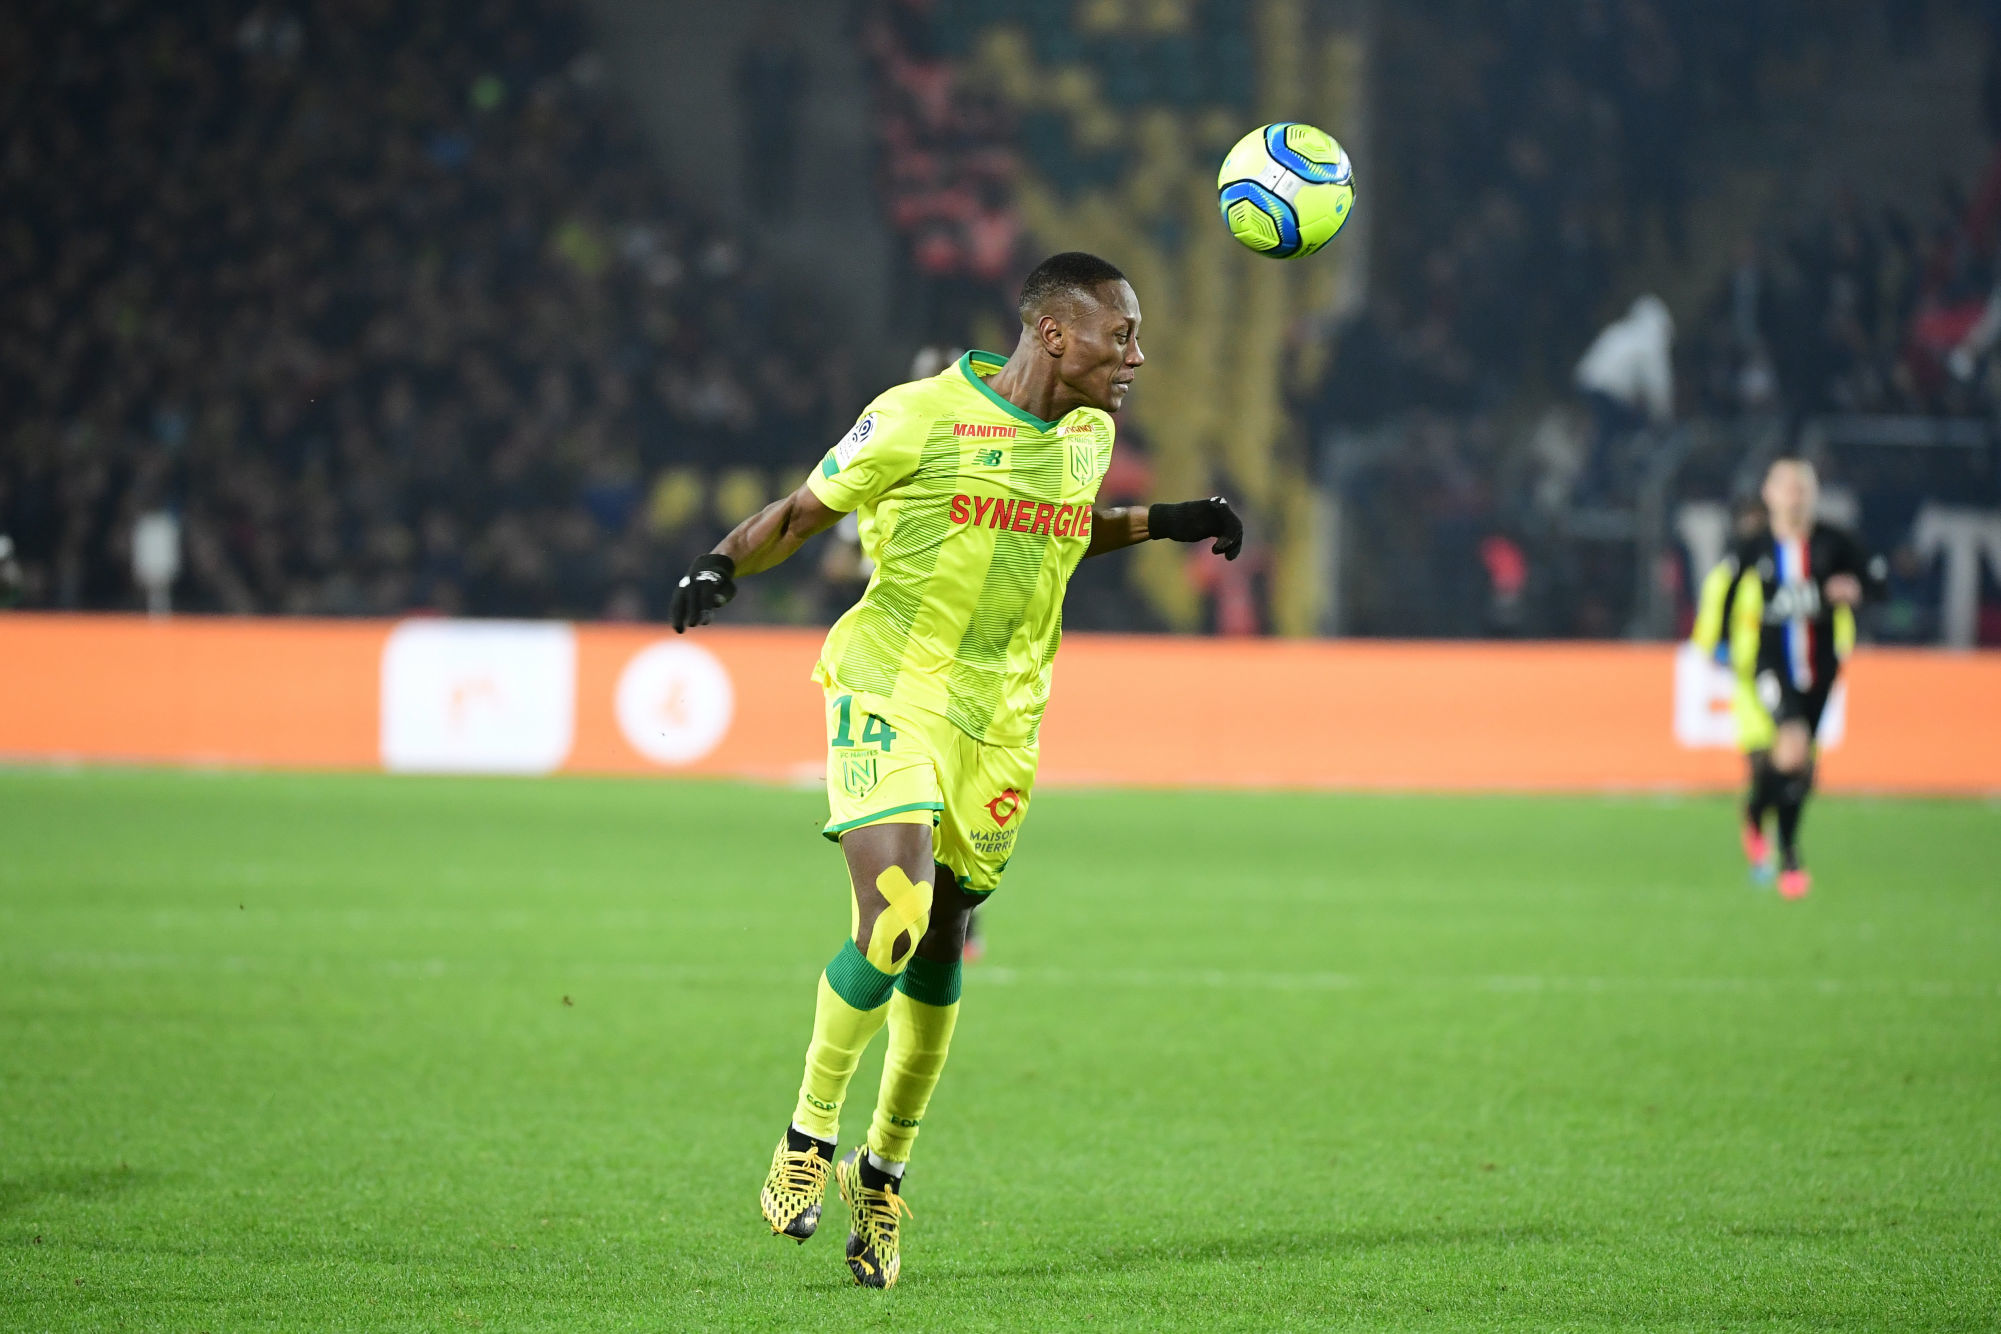 Charles TRAORE of Nantes during the Ligue 1 match between FC Nantes and Paris Saint-Germain at Stade de la Beaujoire on February 4, 2020 in Nantes, France. (Photo by Dave Winter/Icon Sport) - Charles TRAORE - Stade de La Beaujoire - Louis Fonteneau - Nantes (France)